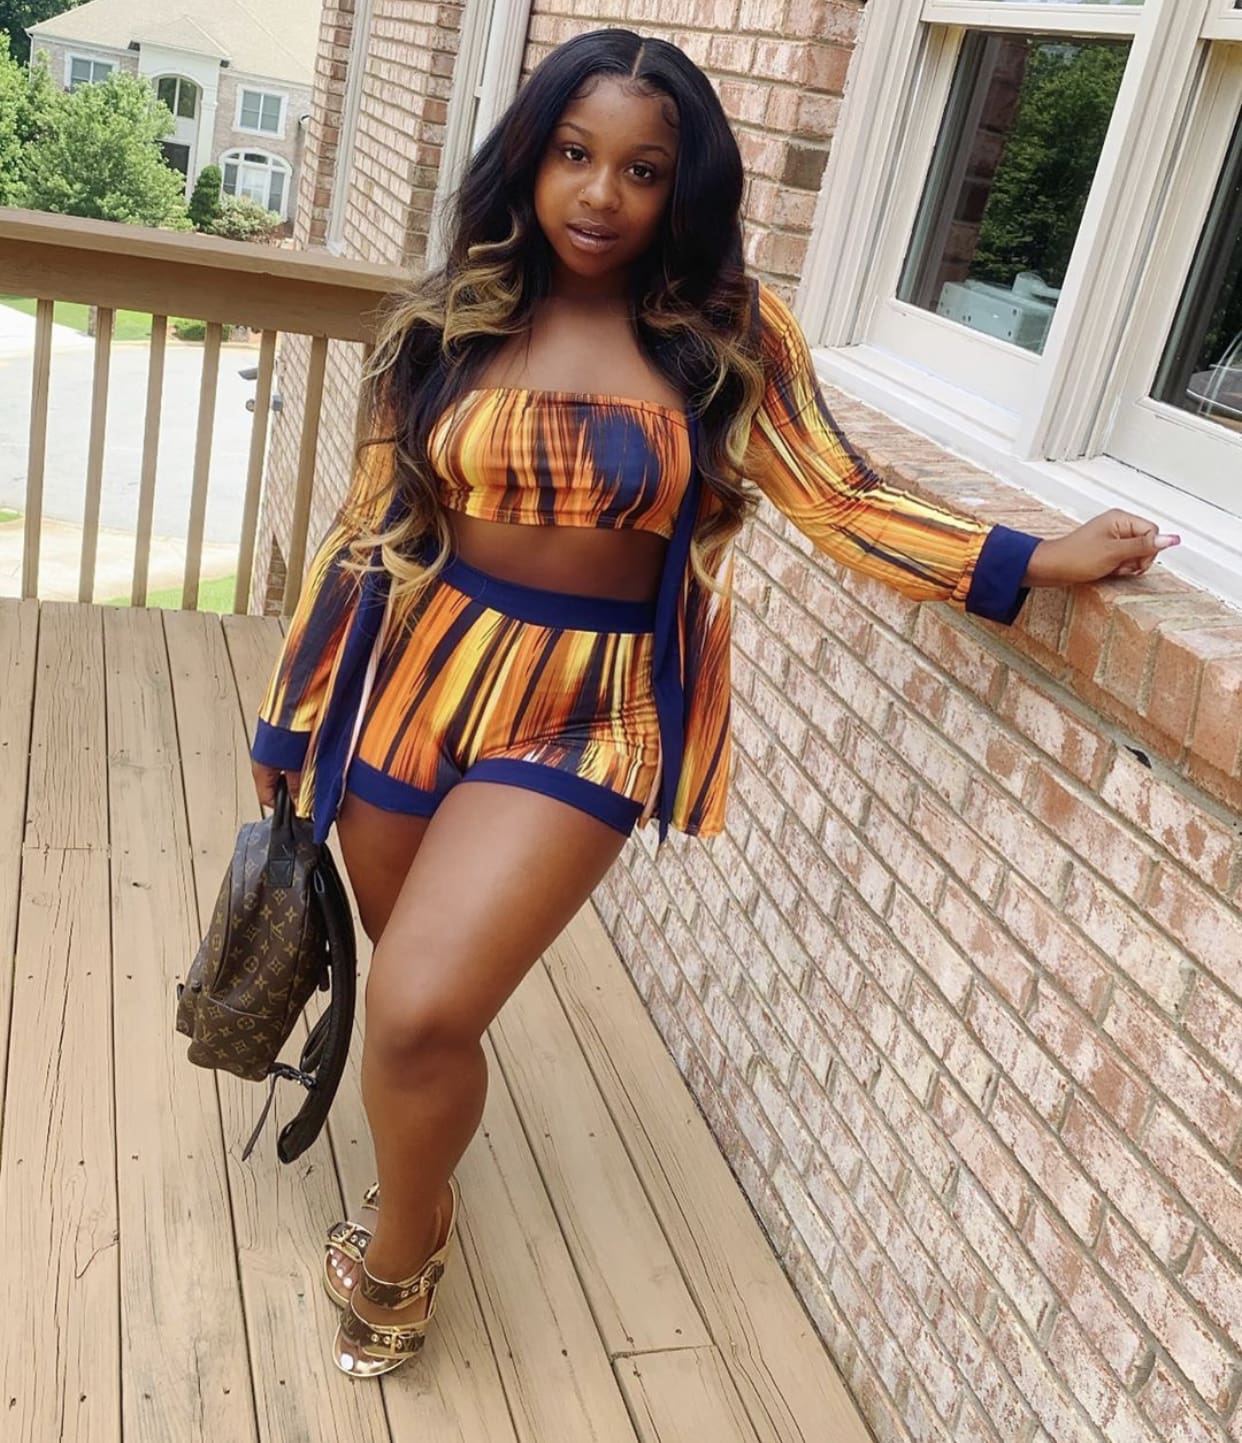 Reginae Carter Looks Gorgeous With Blonde Highlights In Her Latest Photo Session Following The Breakup From YFN Lucci